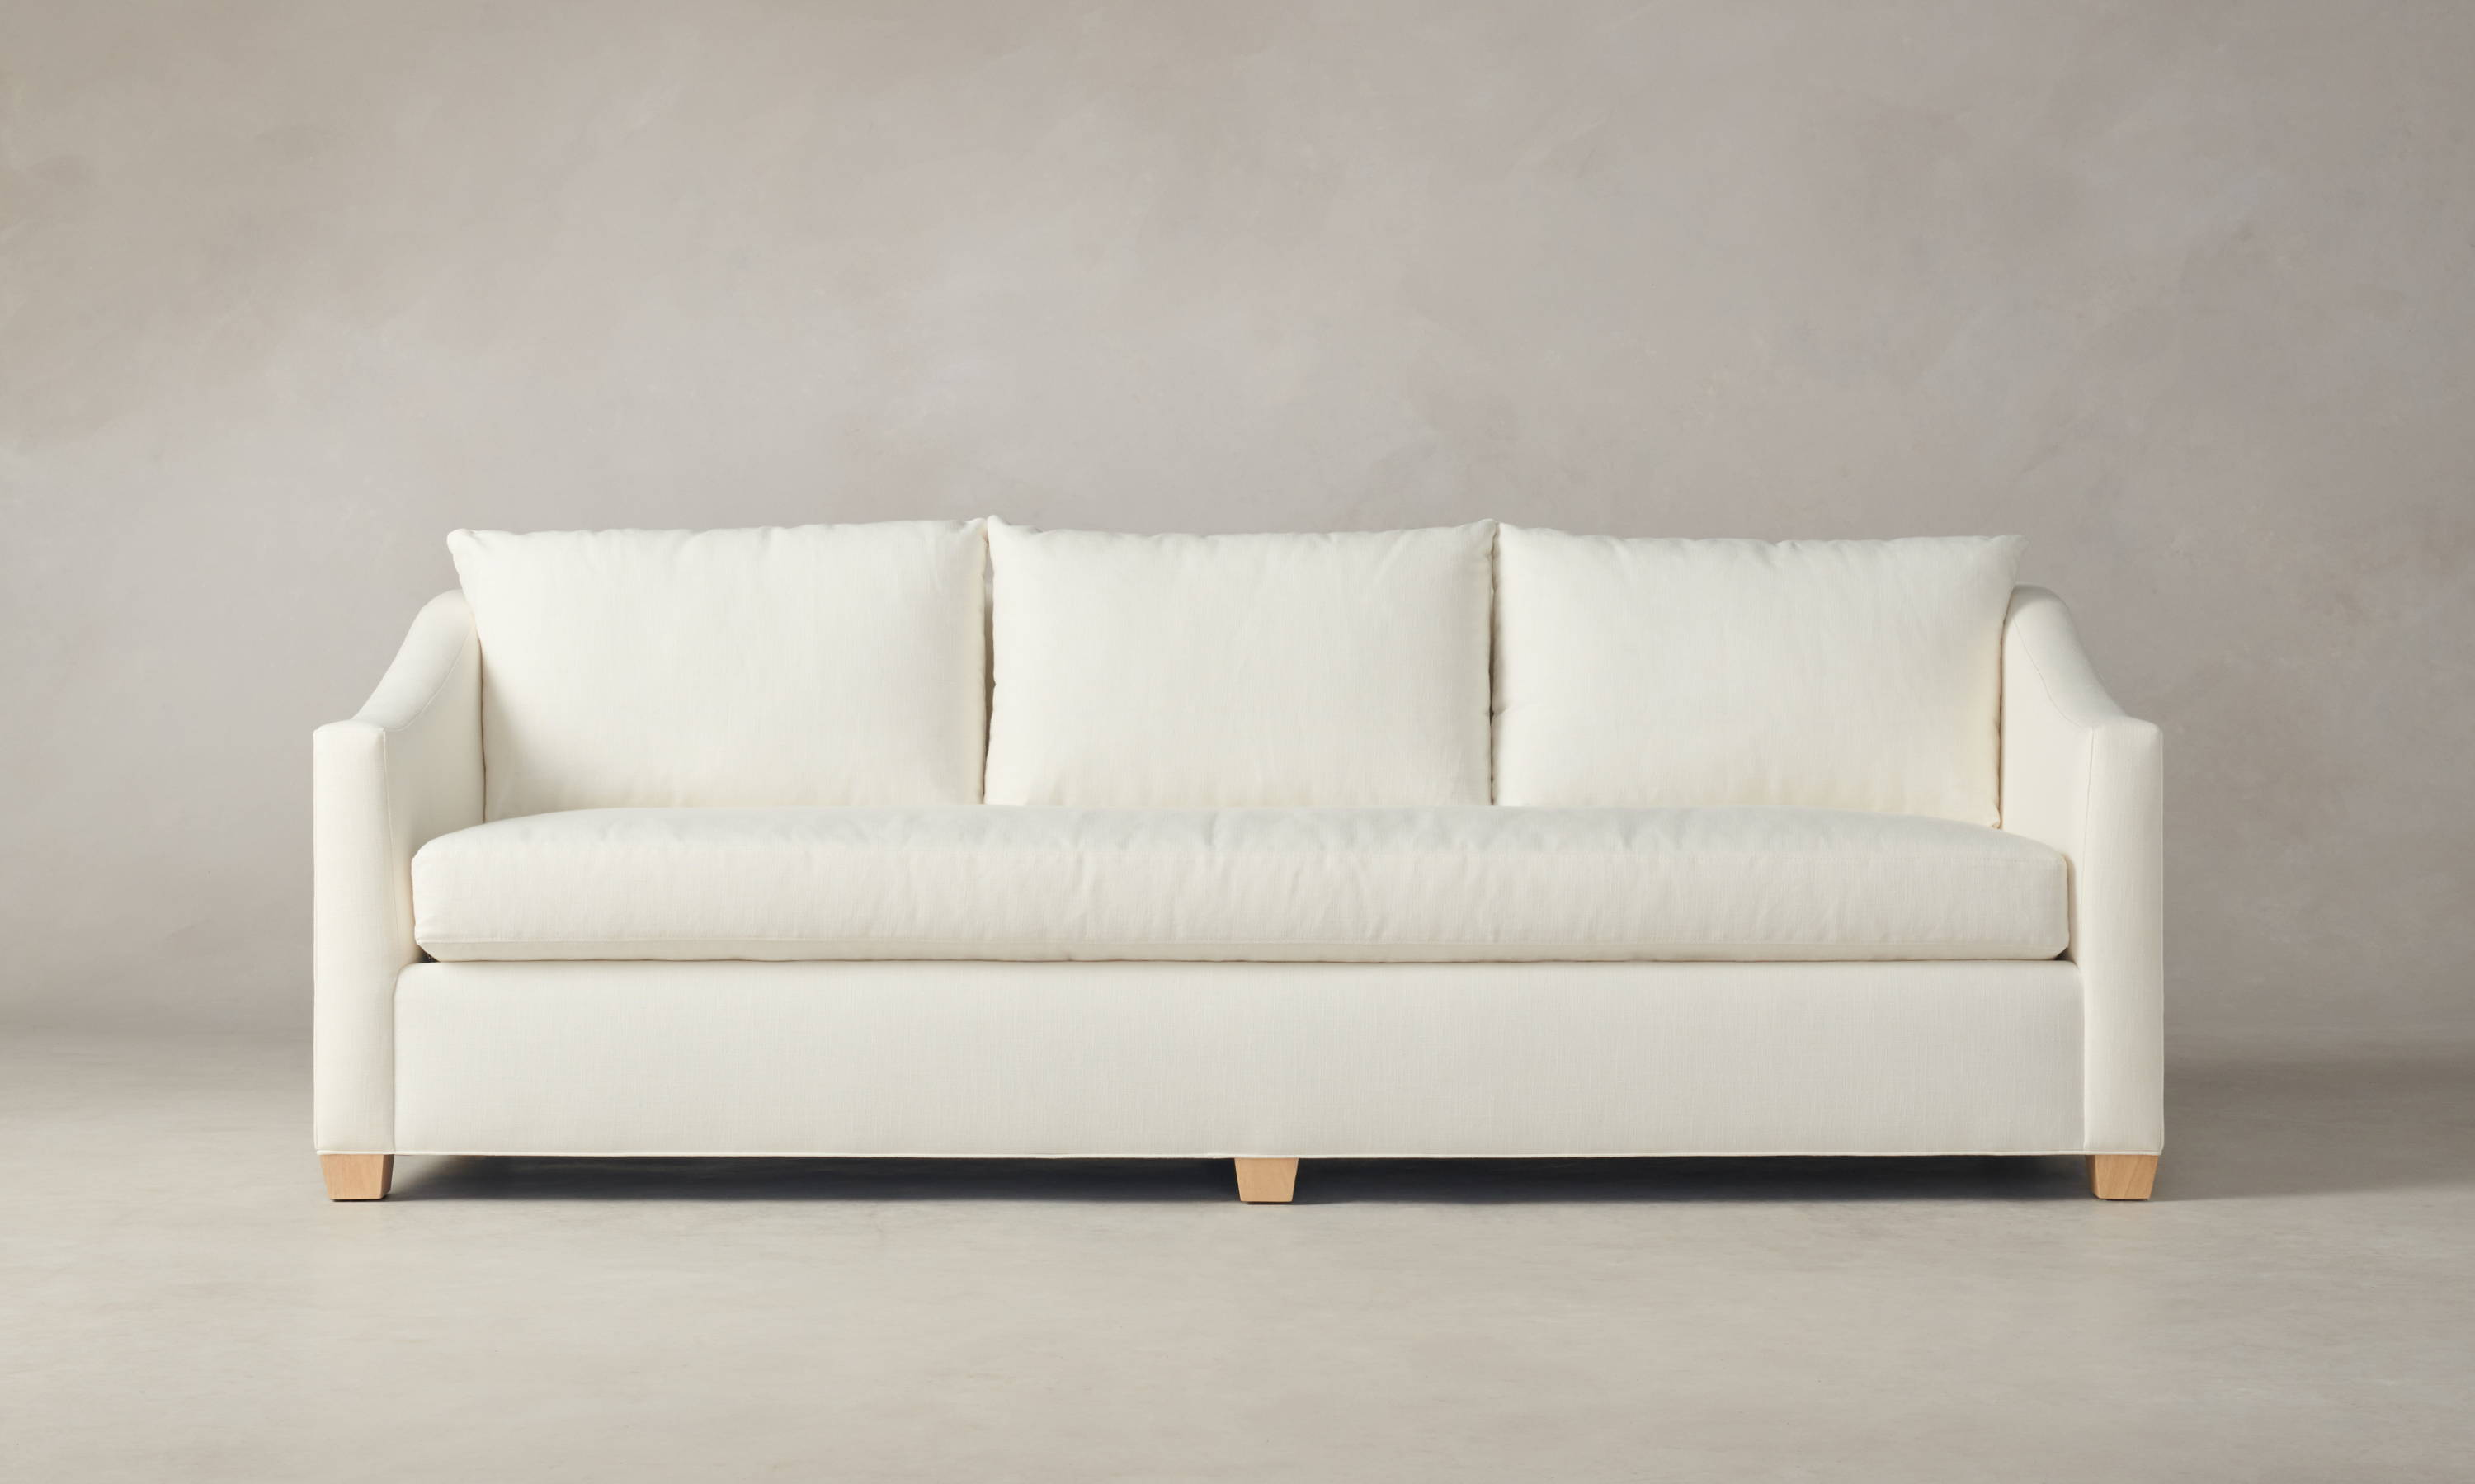 https://maidenhome.com/collections/the-sullivan-sofa?color=Pearl&size=100&finish=Driftwood&currentFabric=performance-textured-linen&currentType=sofa